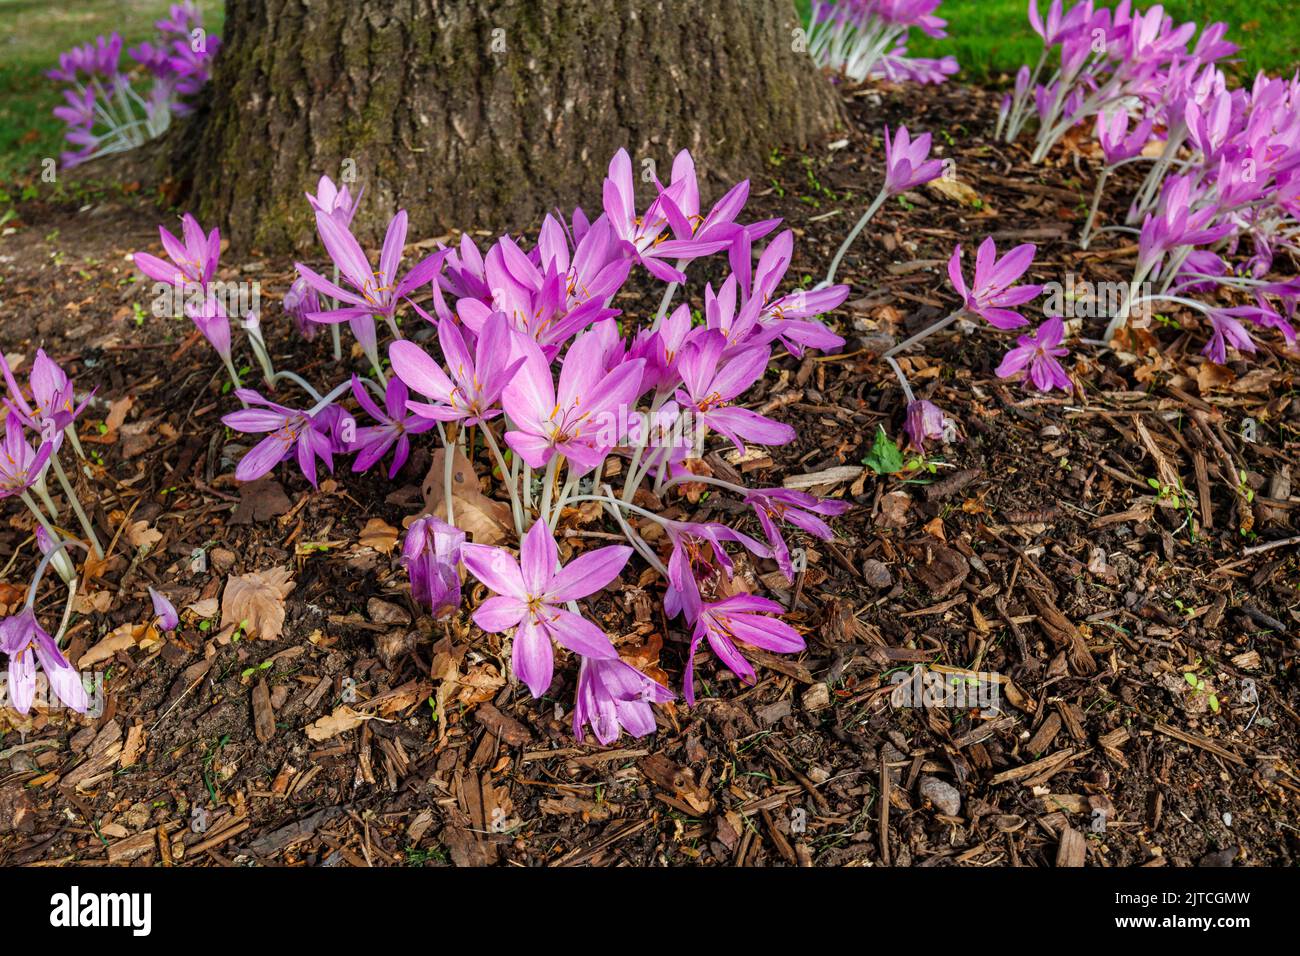 Delicate purple Colchicum giganteum 'Giant' (autumn crocus) in flower in late summer to early autumn in RHS Garden, Wisley, Surrey, south-east England Stock Photo